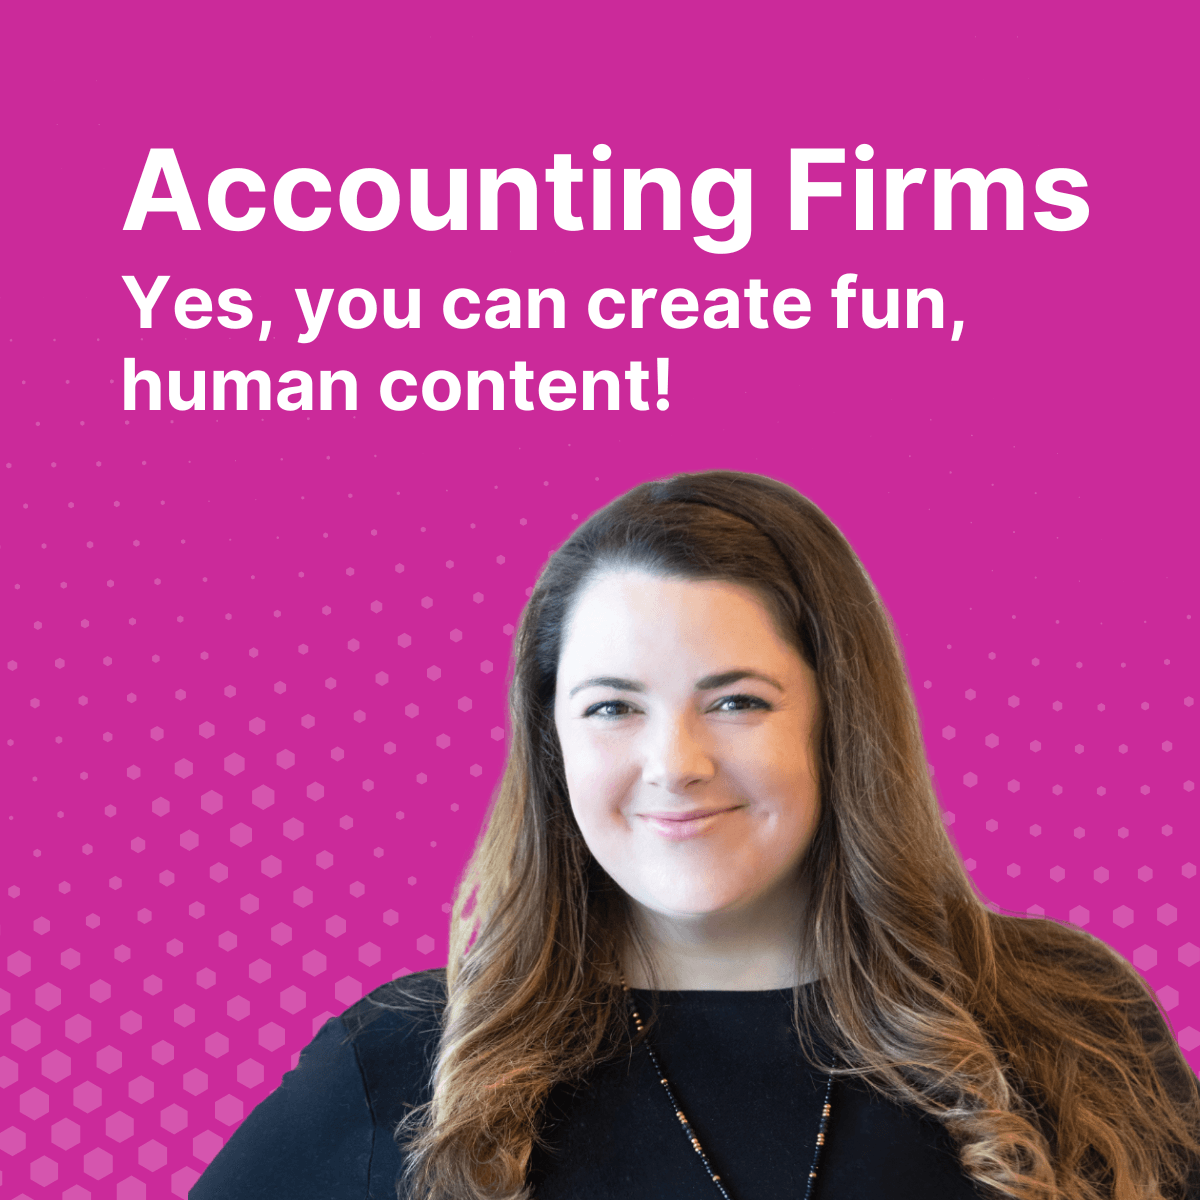 Yes, accounting firms, you can create fun, human content (an intervention)